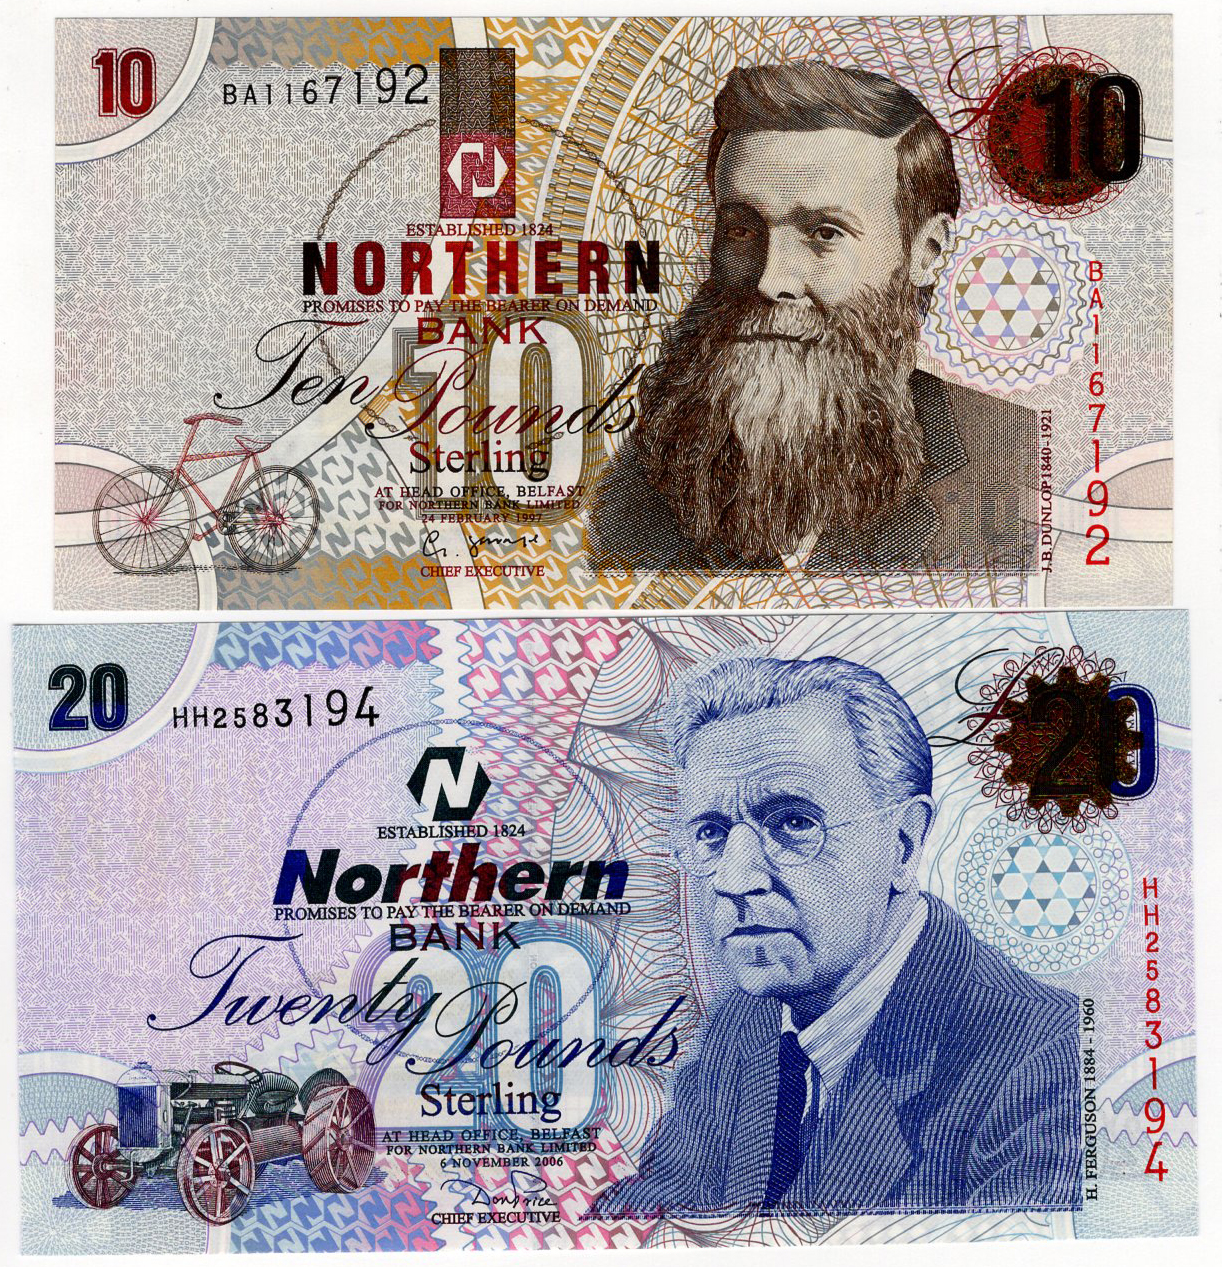 Northern Ireland, Northern Bank (2), 20 Pounds dated 6th November 2006 serial HH2583194 (PMI